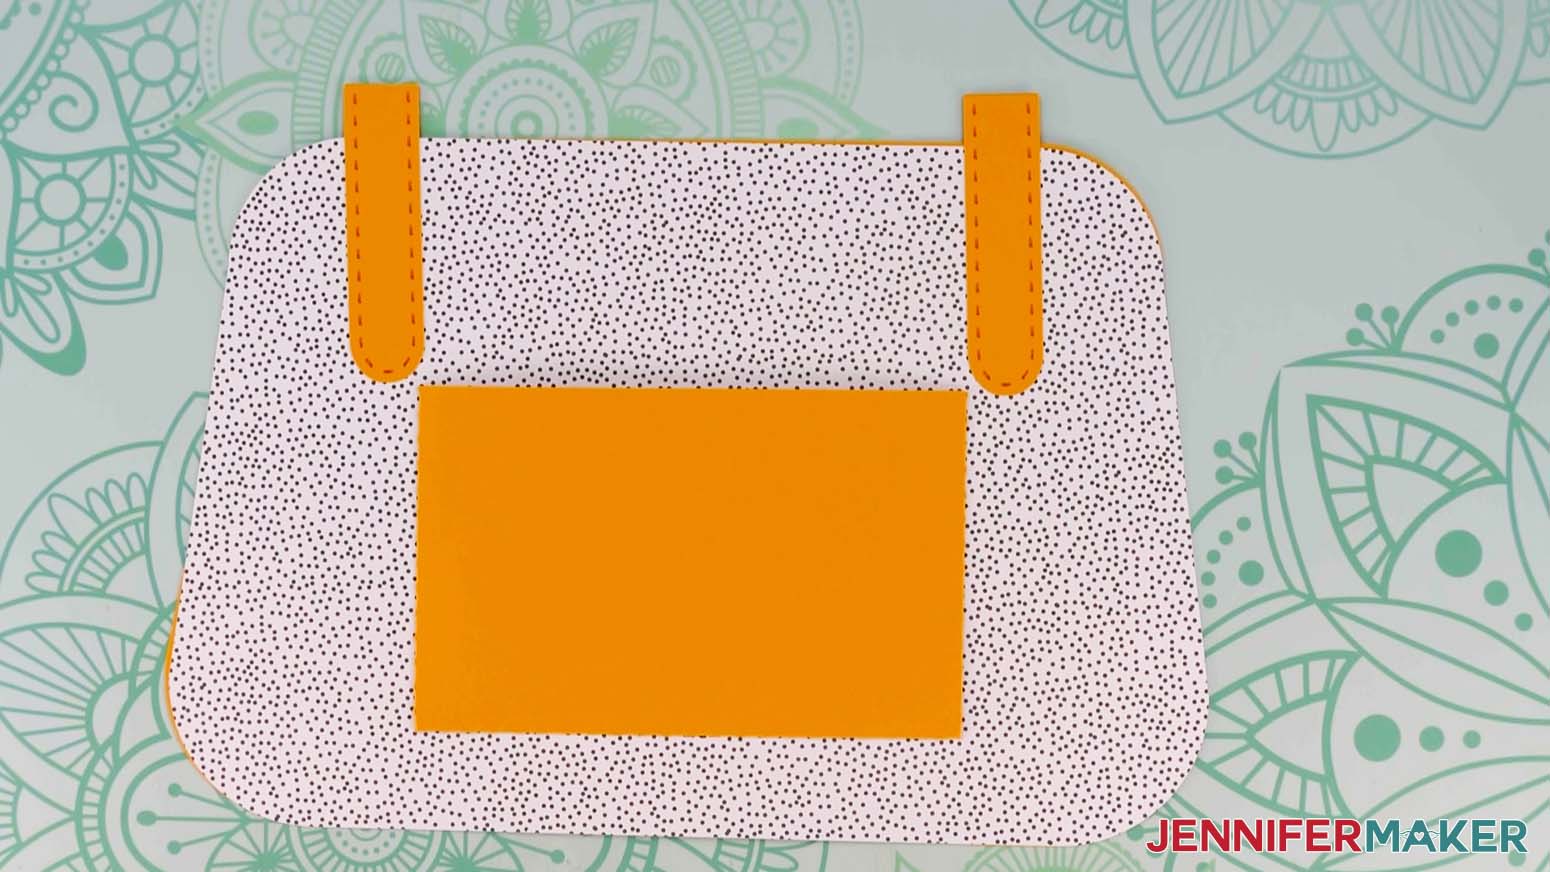 An overhead photo showing the inside of the Flower Power paper handbag with the short handle pieces and pocket attached